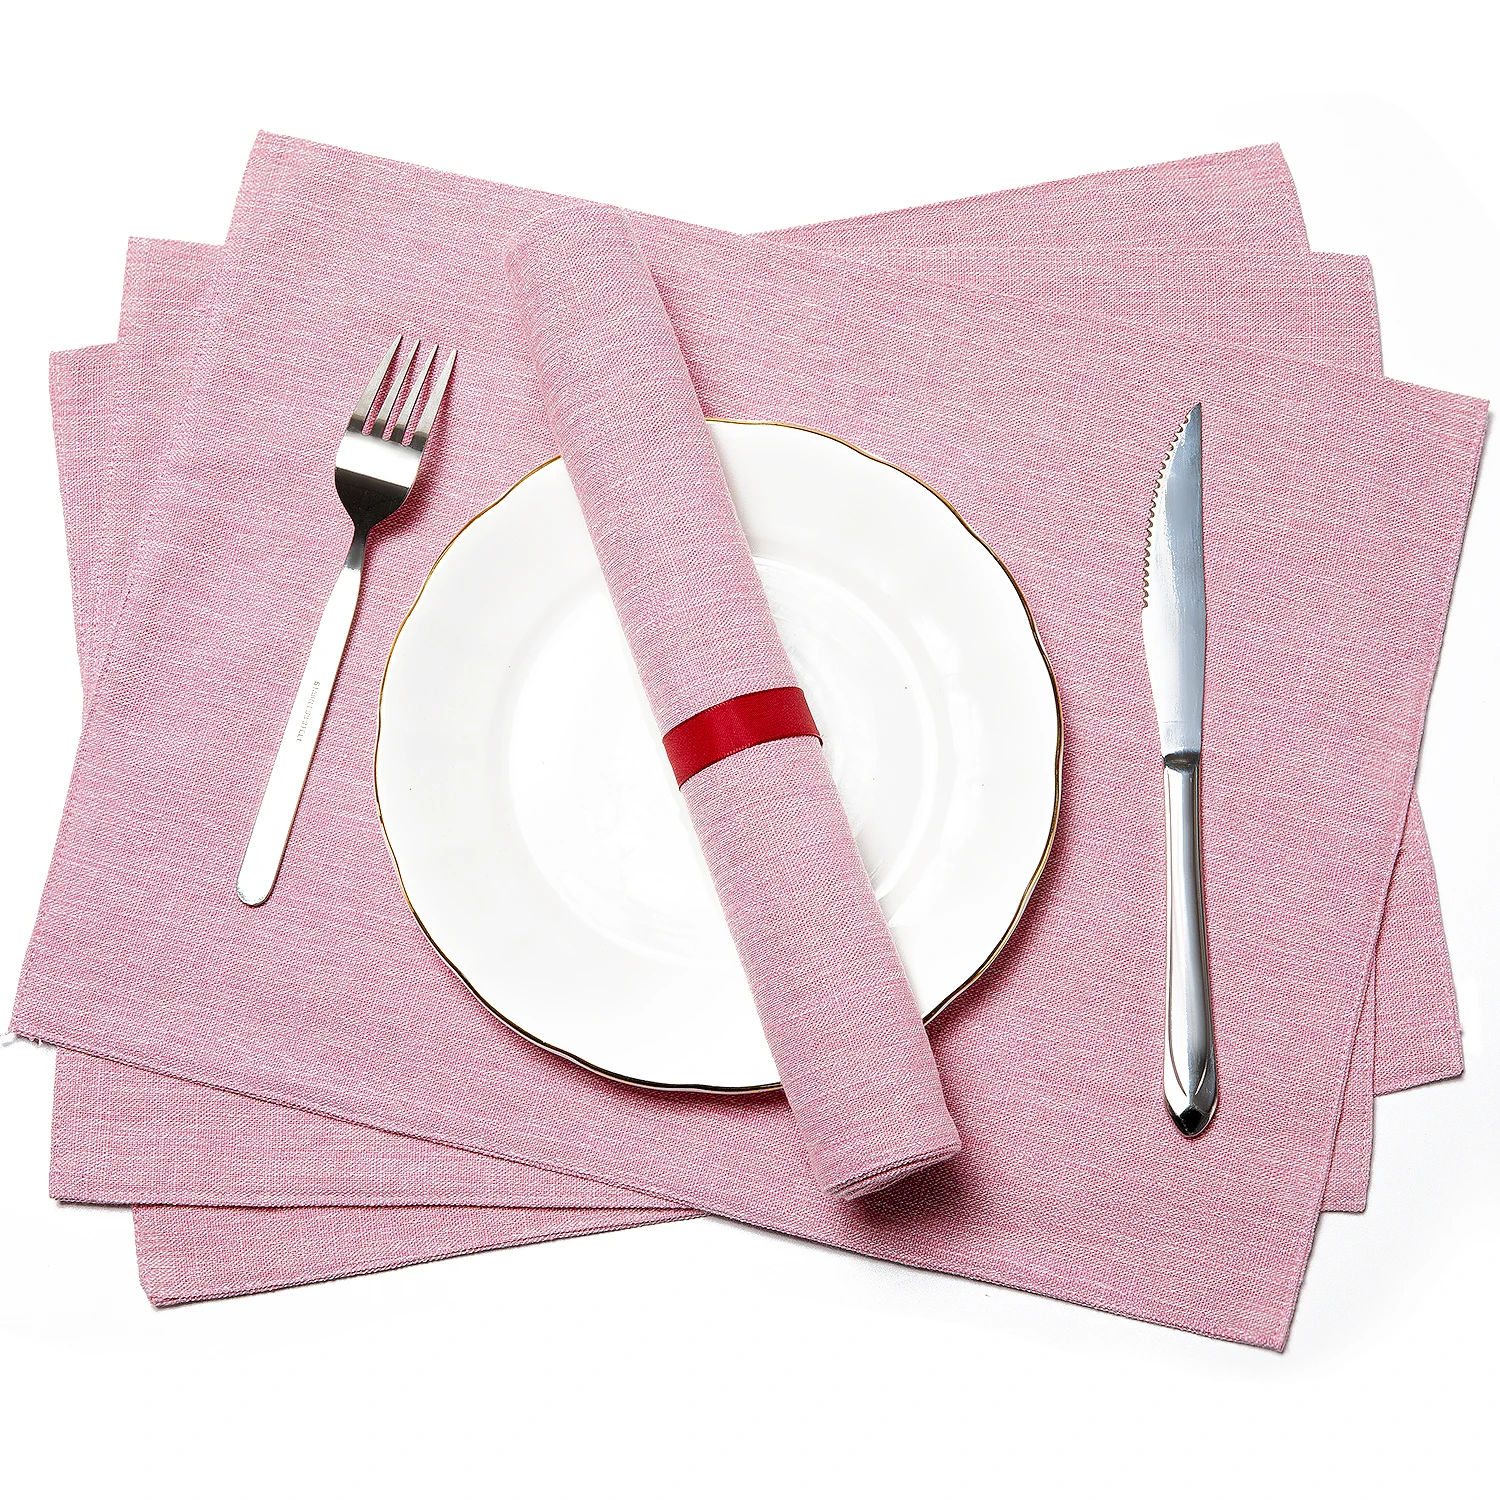 Modern Pink Table Runner + 4 Dining Placemats Tablemats Home Decor Wedding Party Decoration